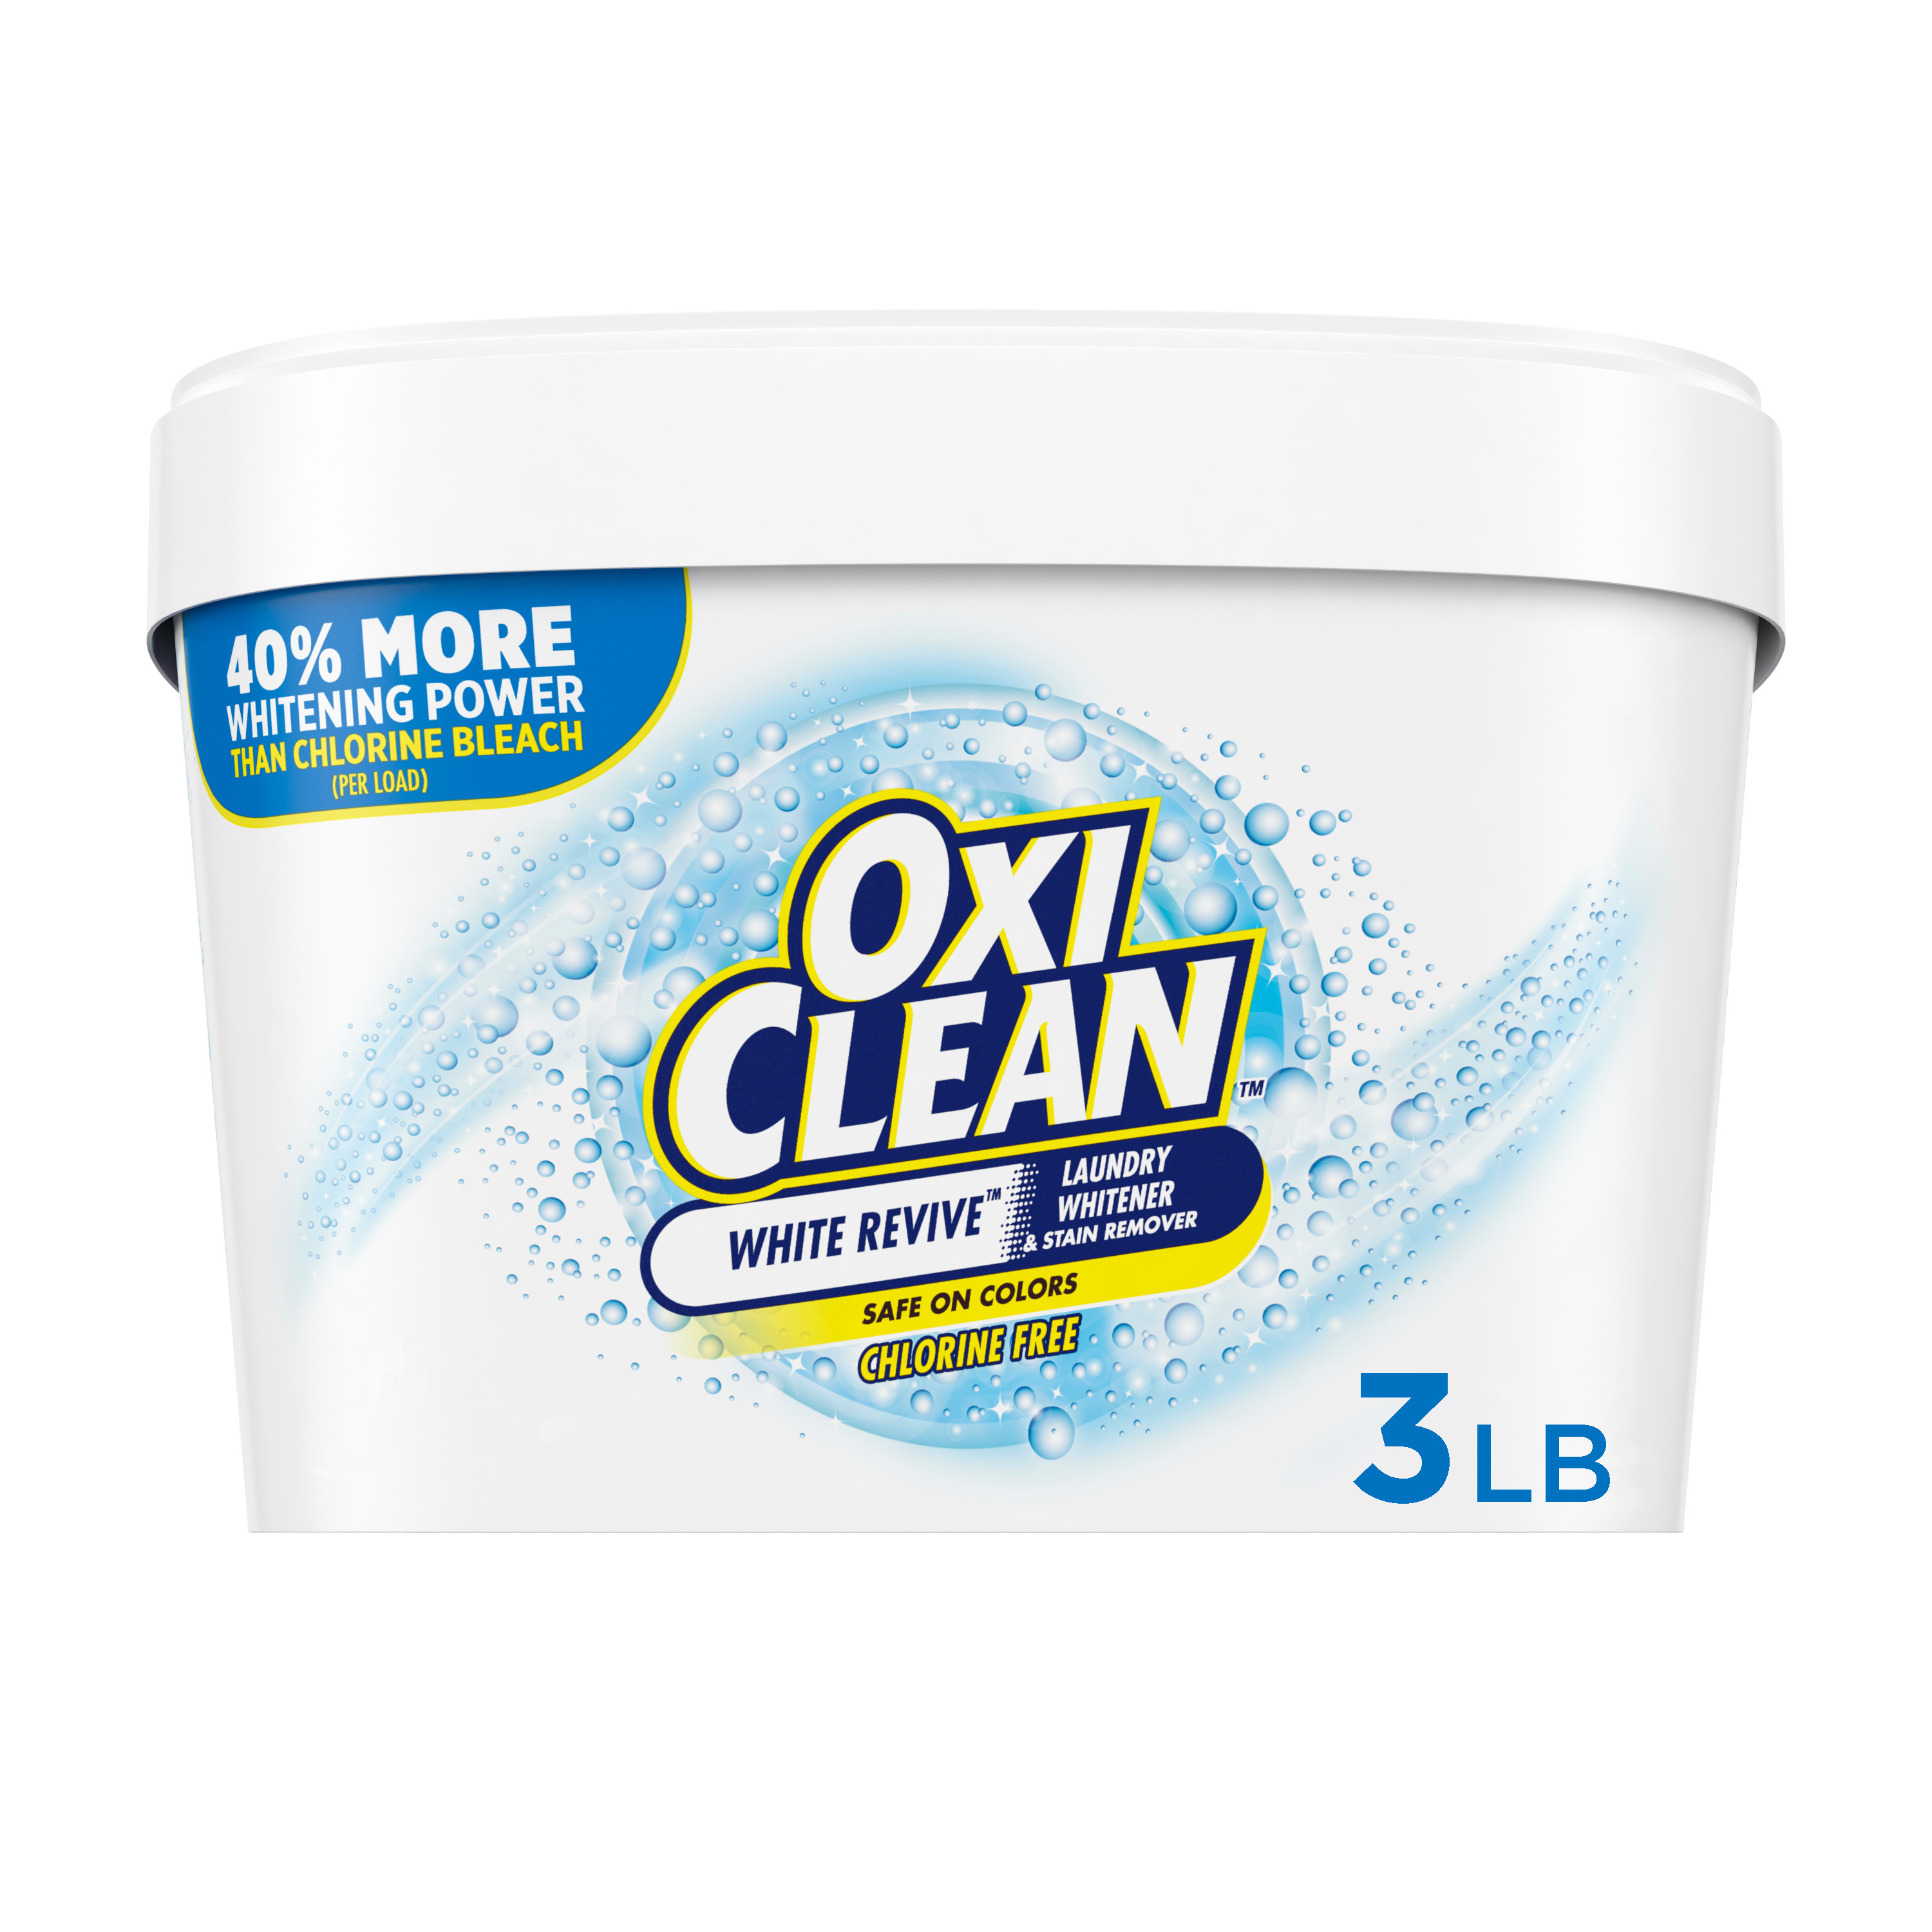 OxiClean White Revive Laundry Whitener and Stain Remover Powder For Clothes, 3 lb - image 1 of 9